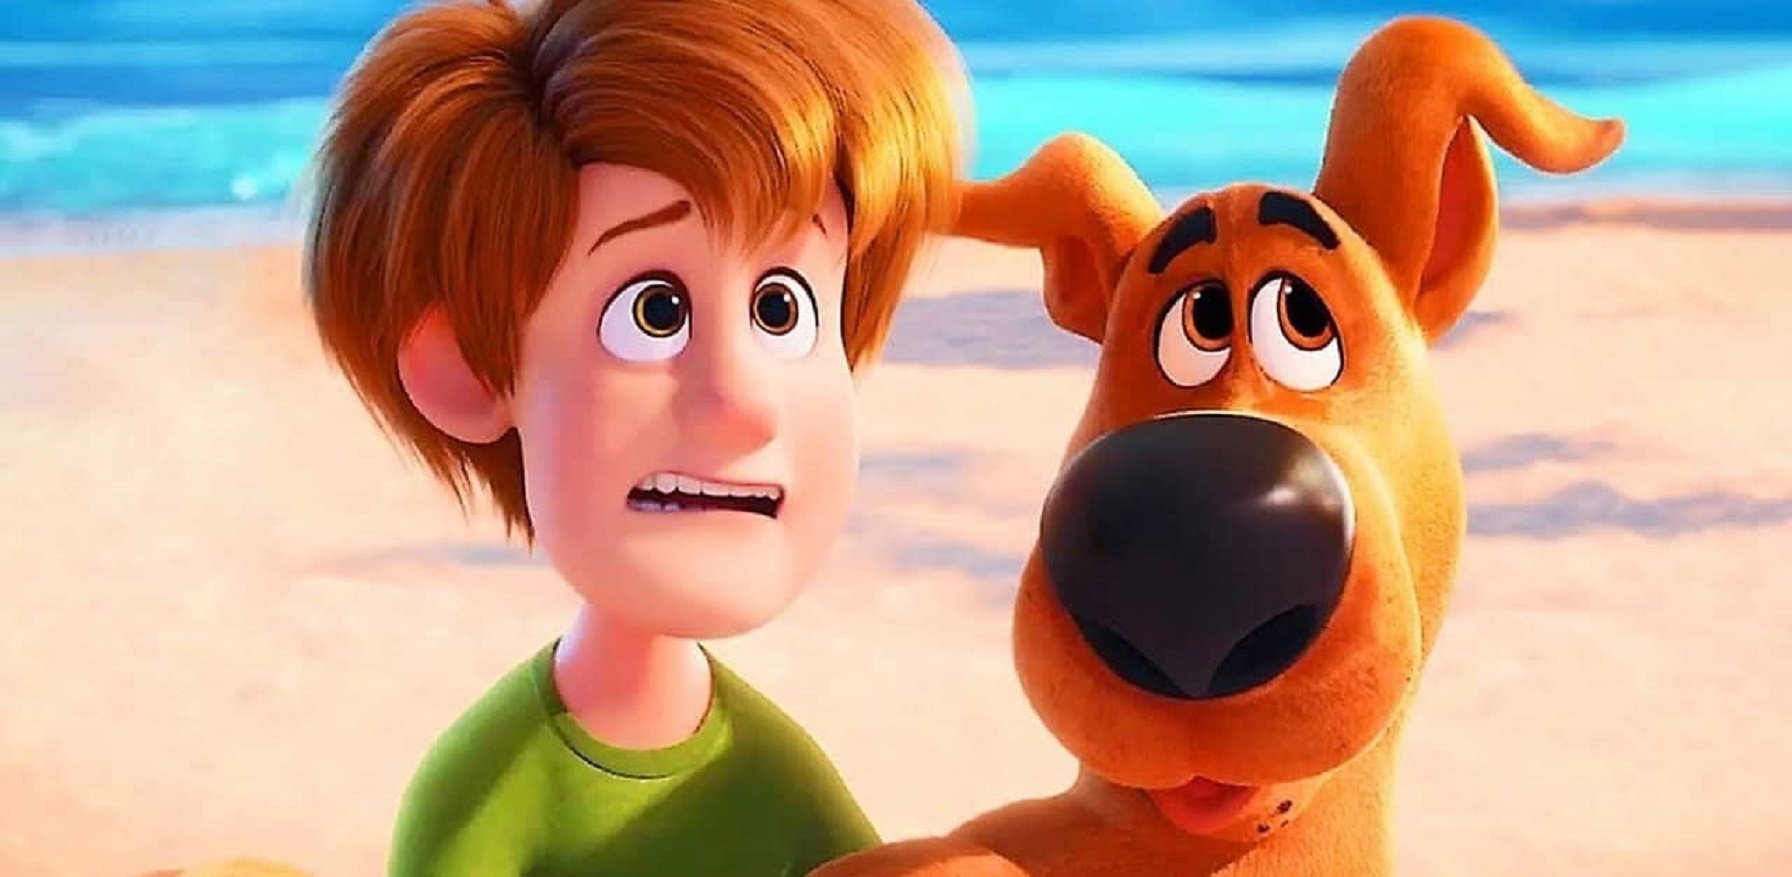 Watch: NEW Scooby Doo Movie Trailer is Here and It's Adorable! – Soundpasta